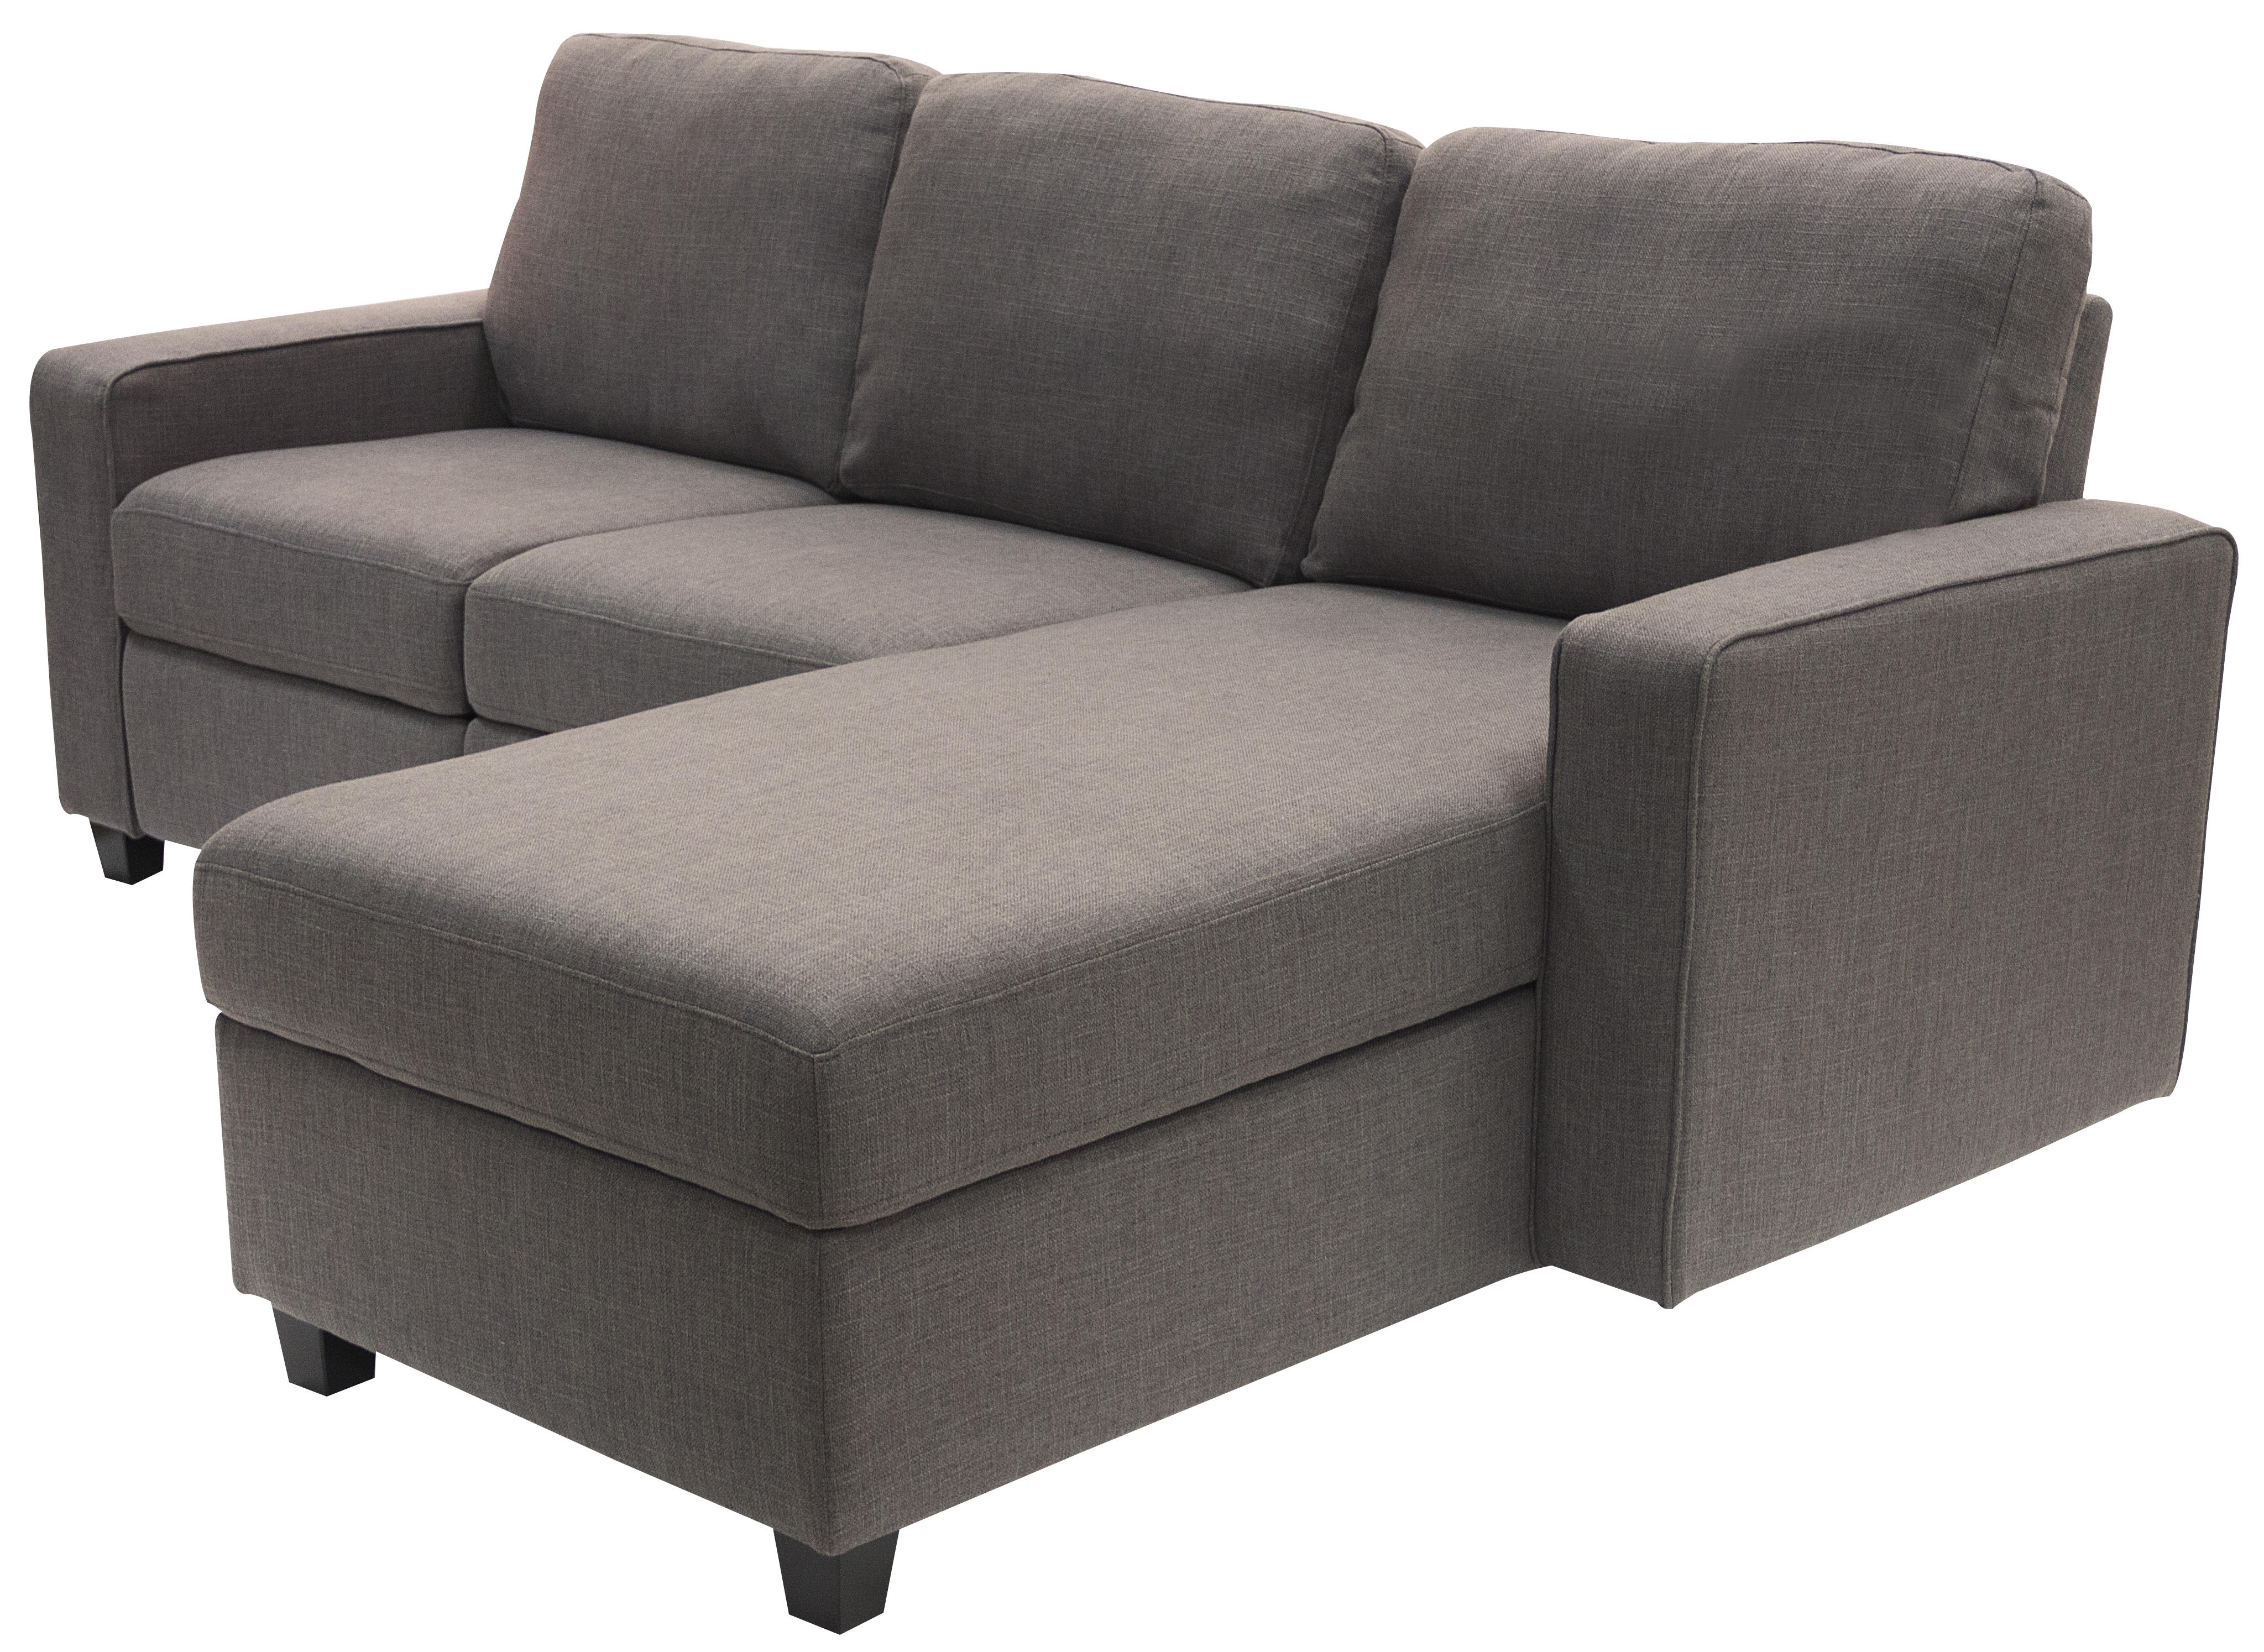 Serta Palisades Reclining Sectional with Right Storage Chaise - Gray - image 5 of 9